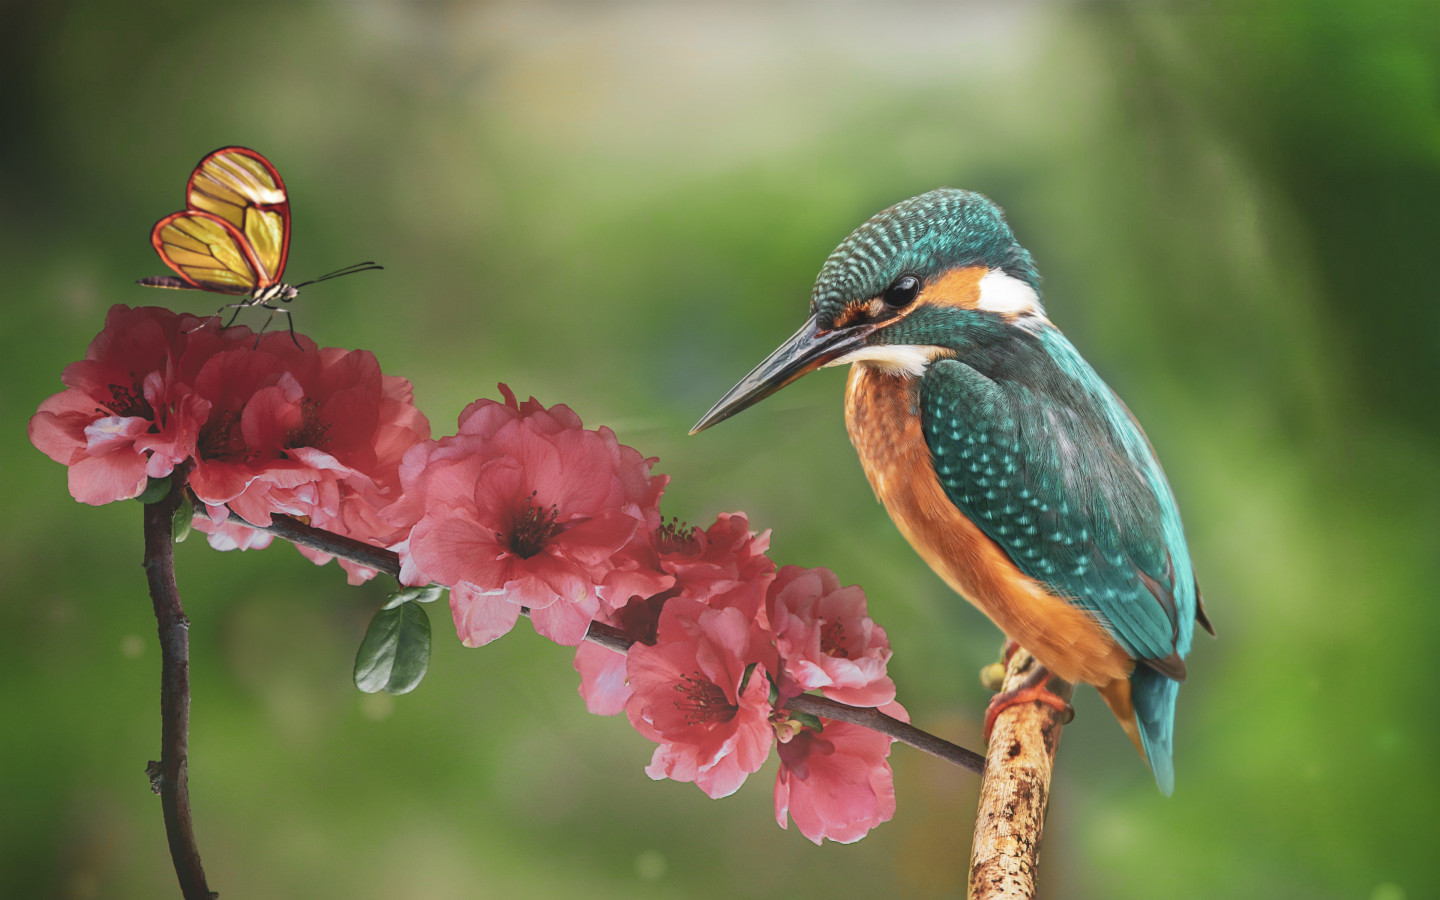 Kingfisher and the butterfly wallpaper 1440x900